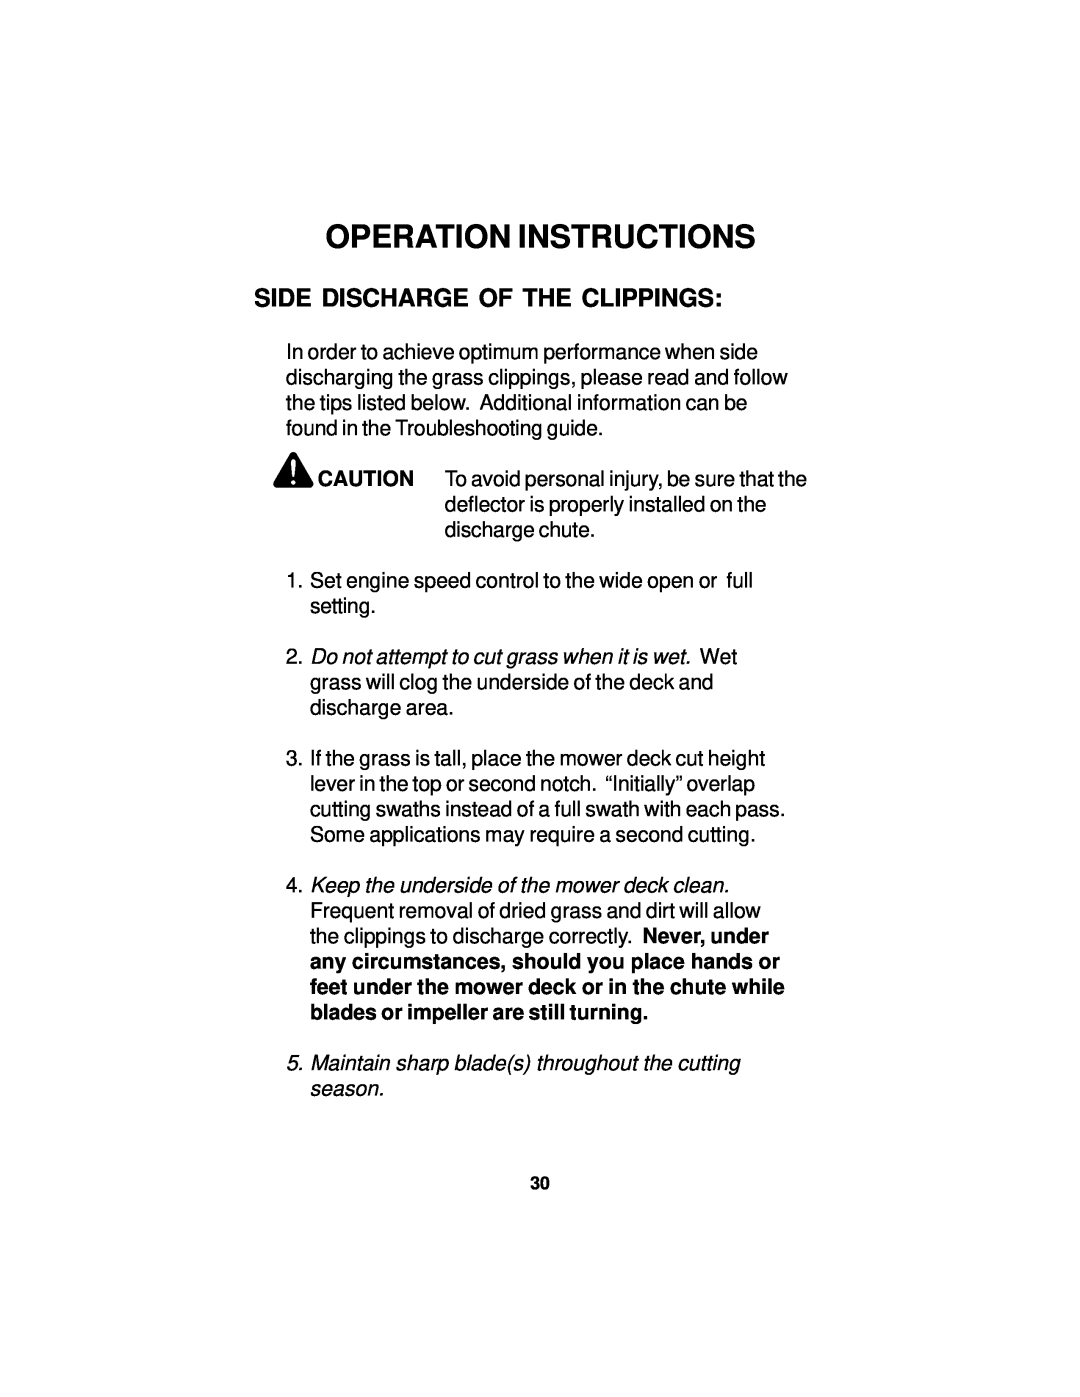 Dixon 14295-0804 manual Side Discharge Of The Clippings, Operation Instructions 